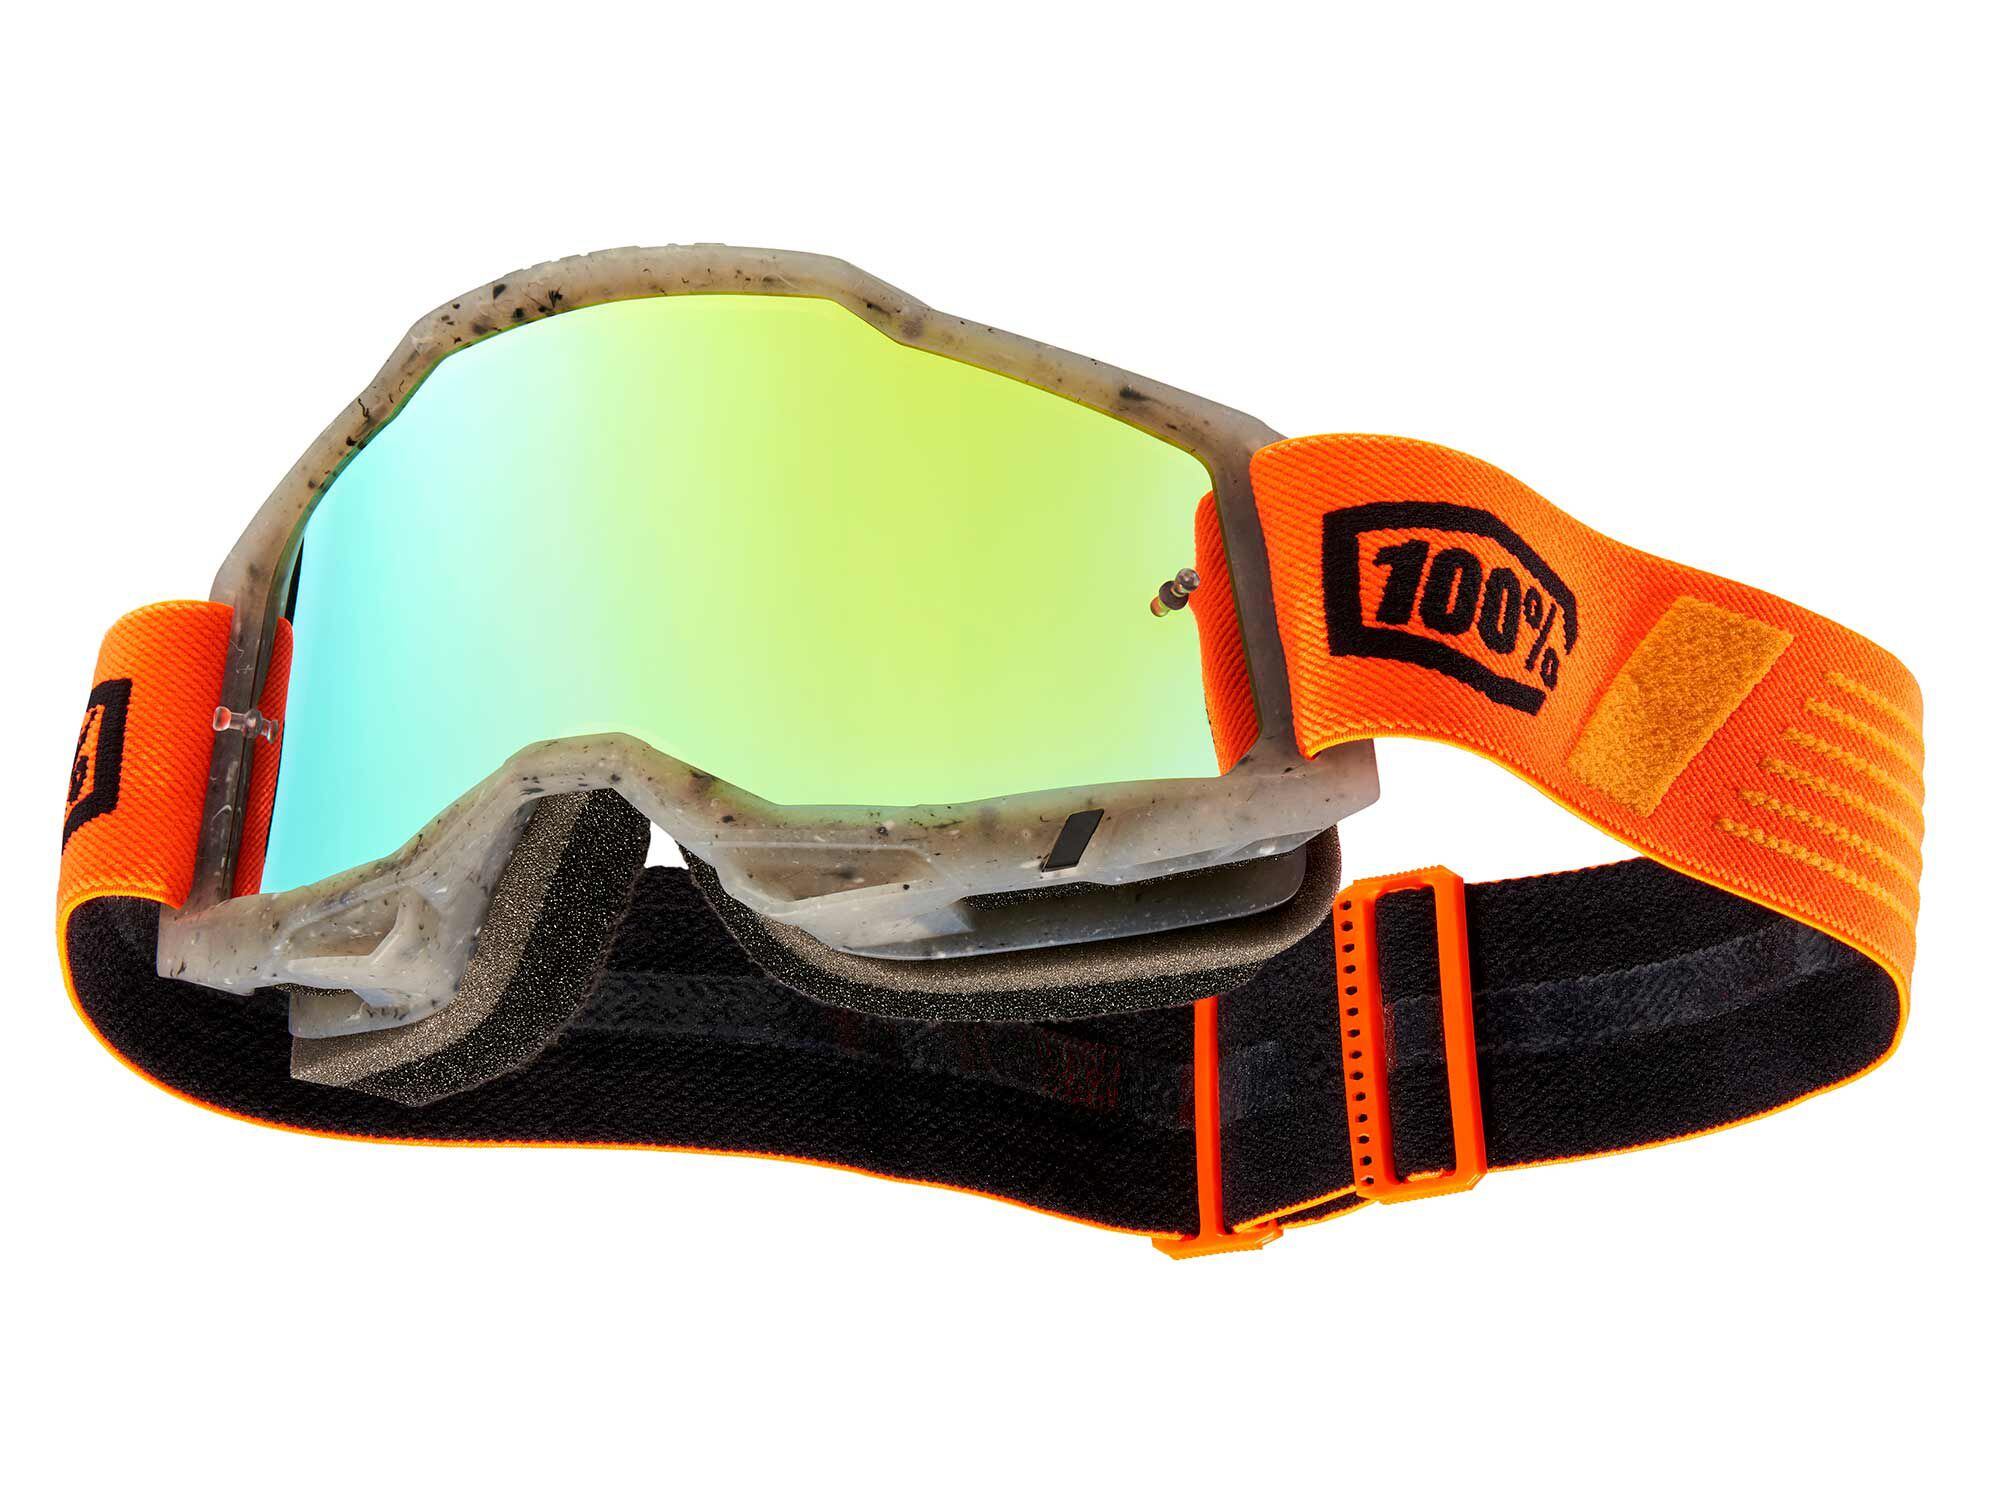 The Accuri 2, an affordable entry point into 100%’s goggle line